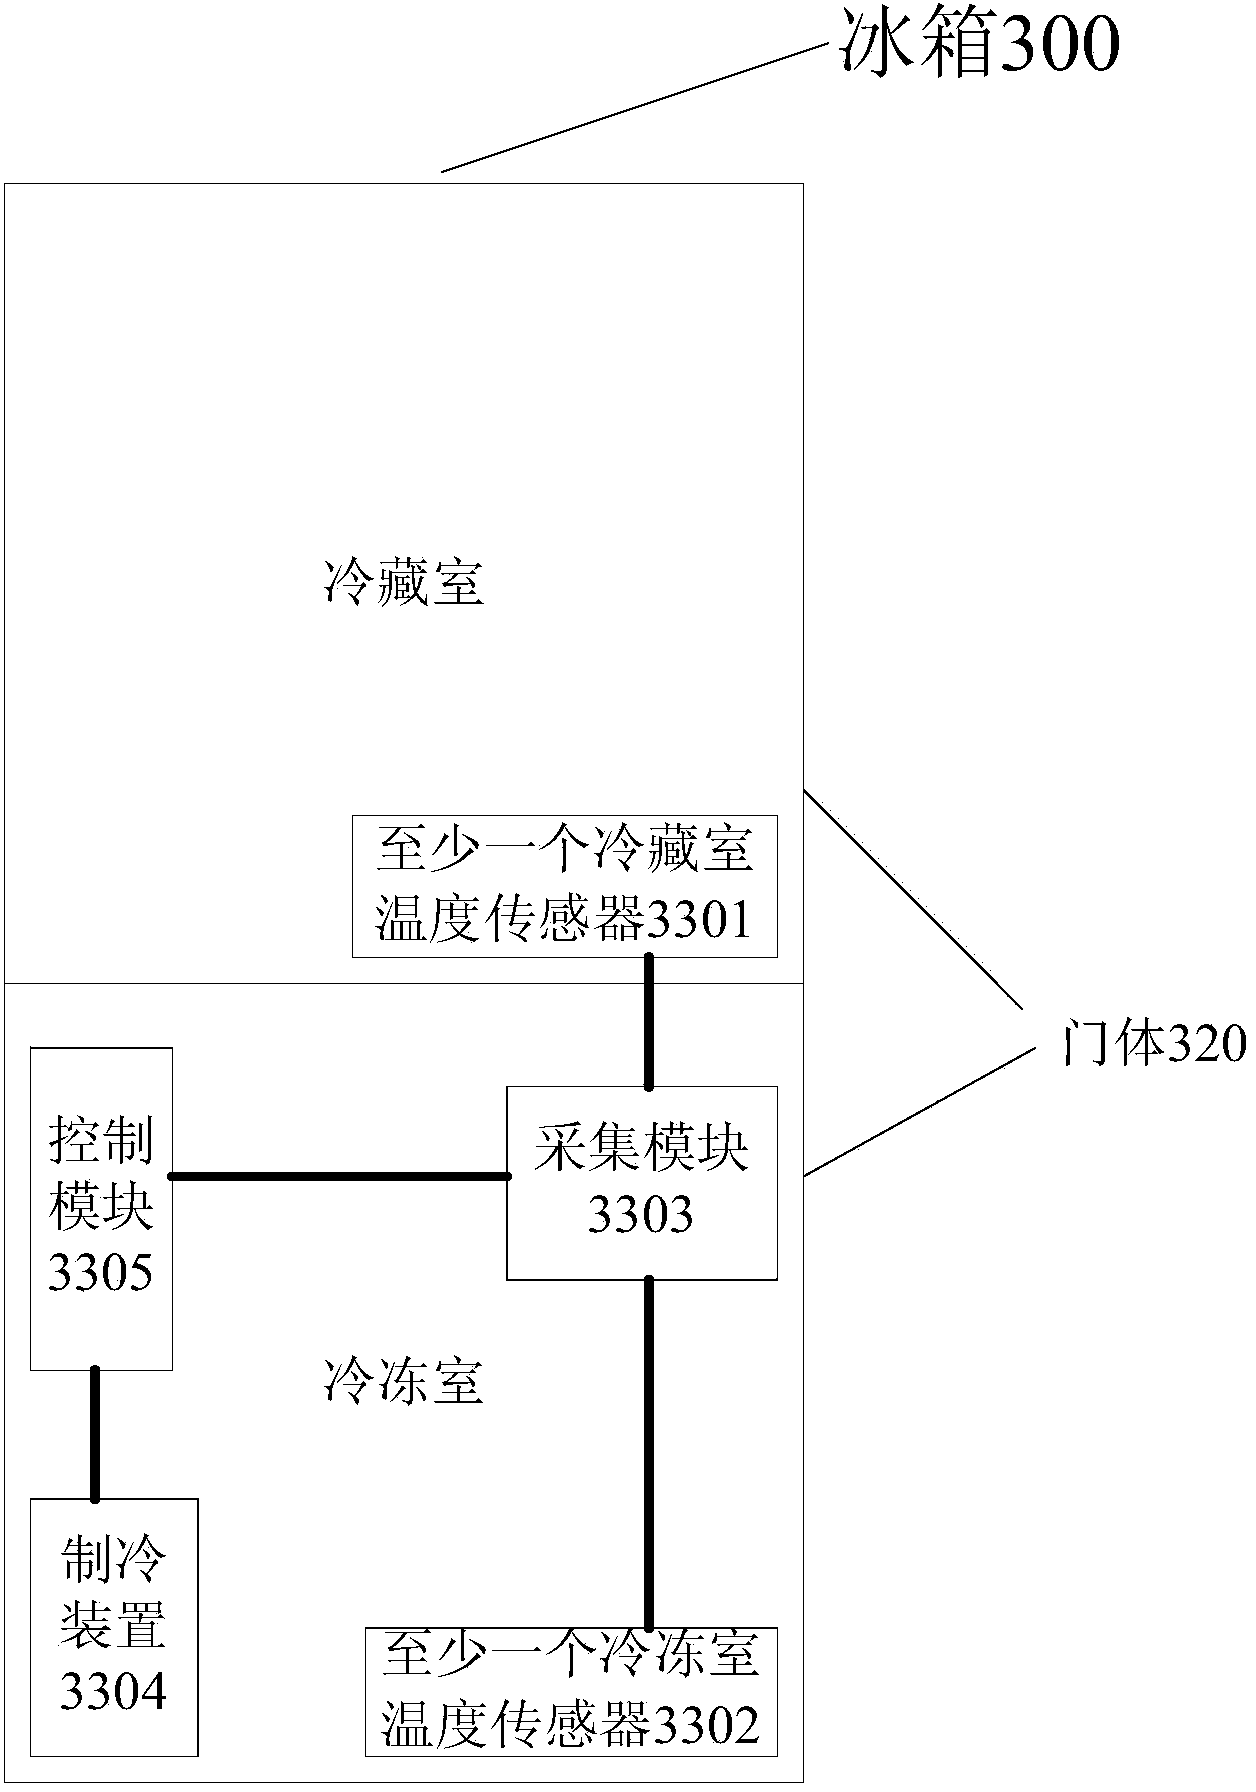 Method for controlling refrigerator and refrigerator